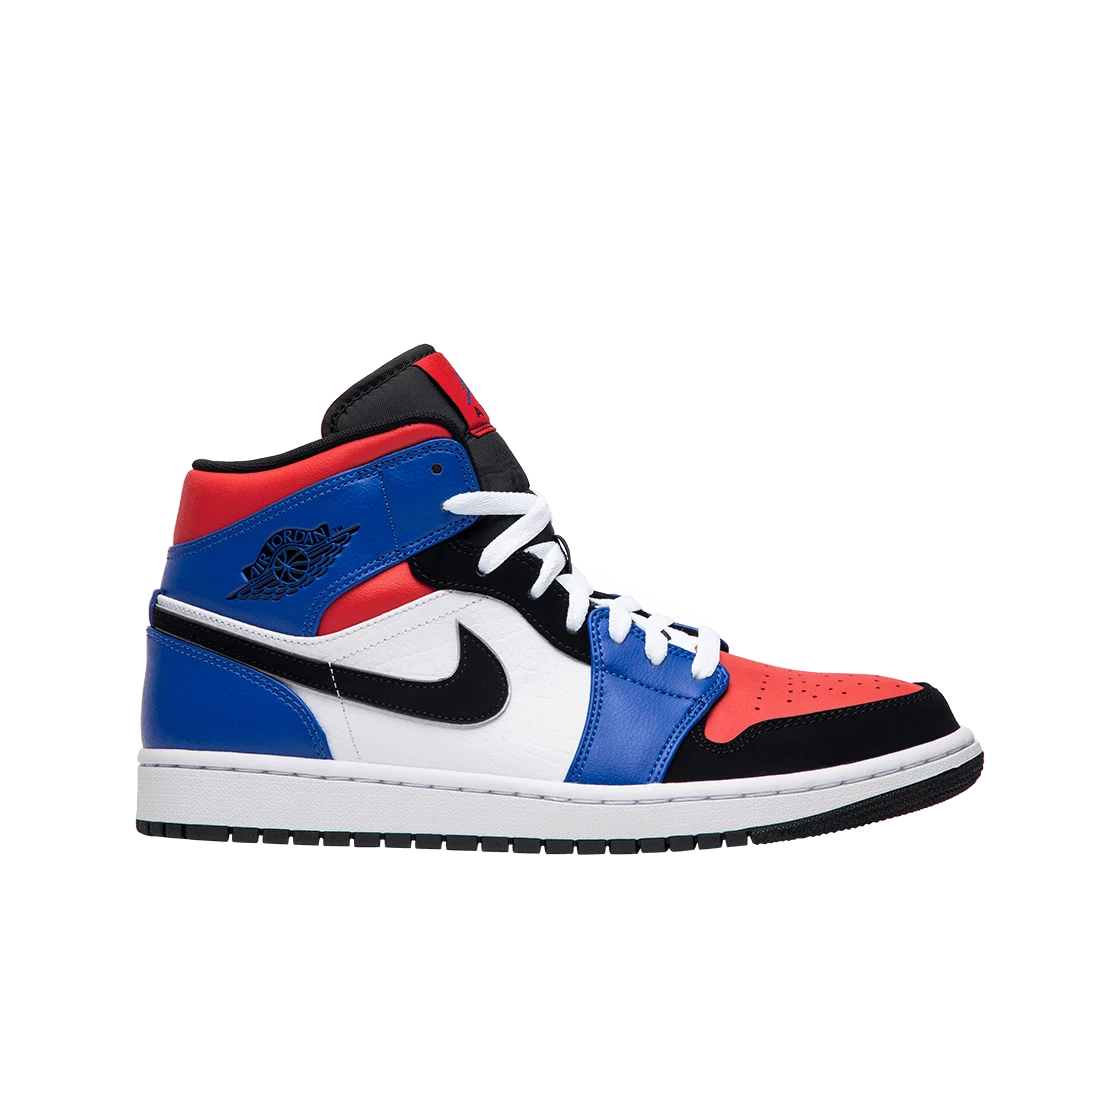 SASOM | shoes Jordan 1 Mid Top 3 Check the latest price now!